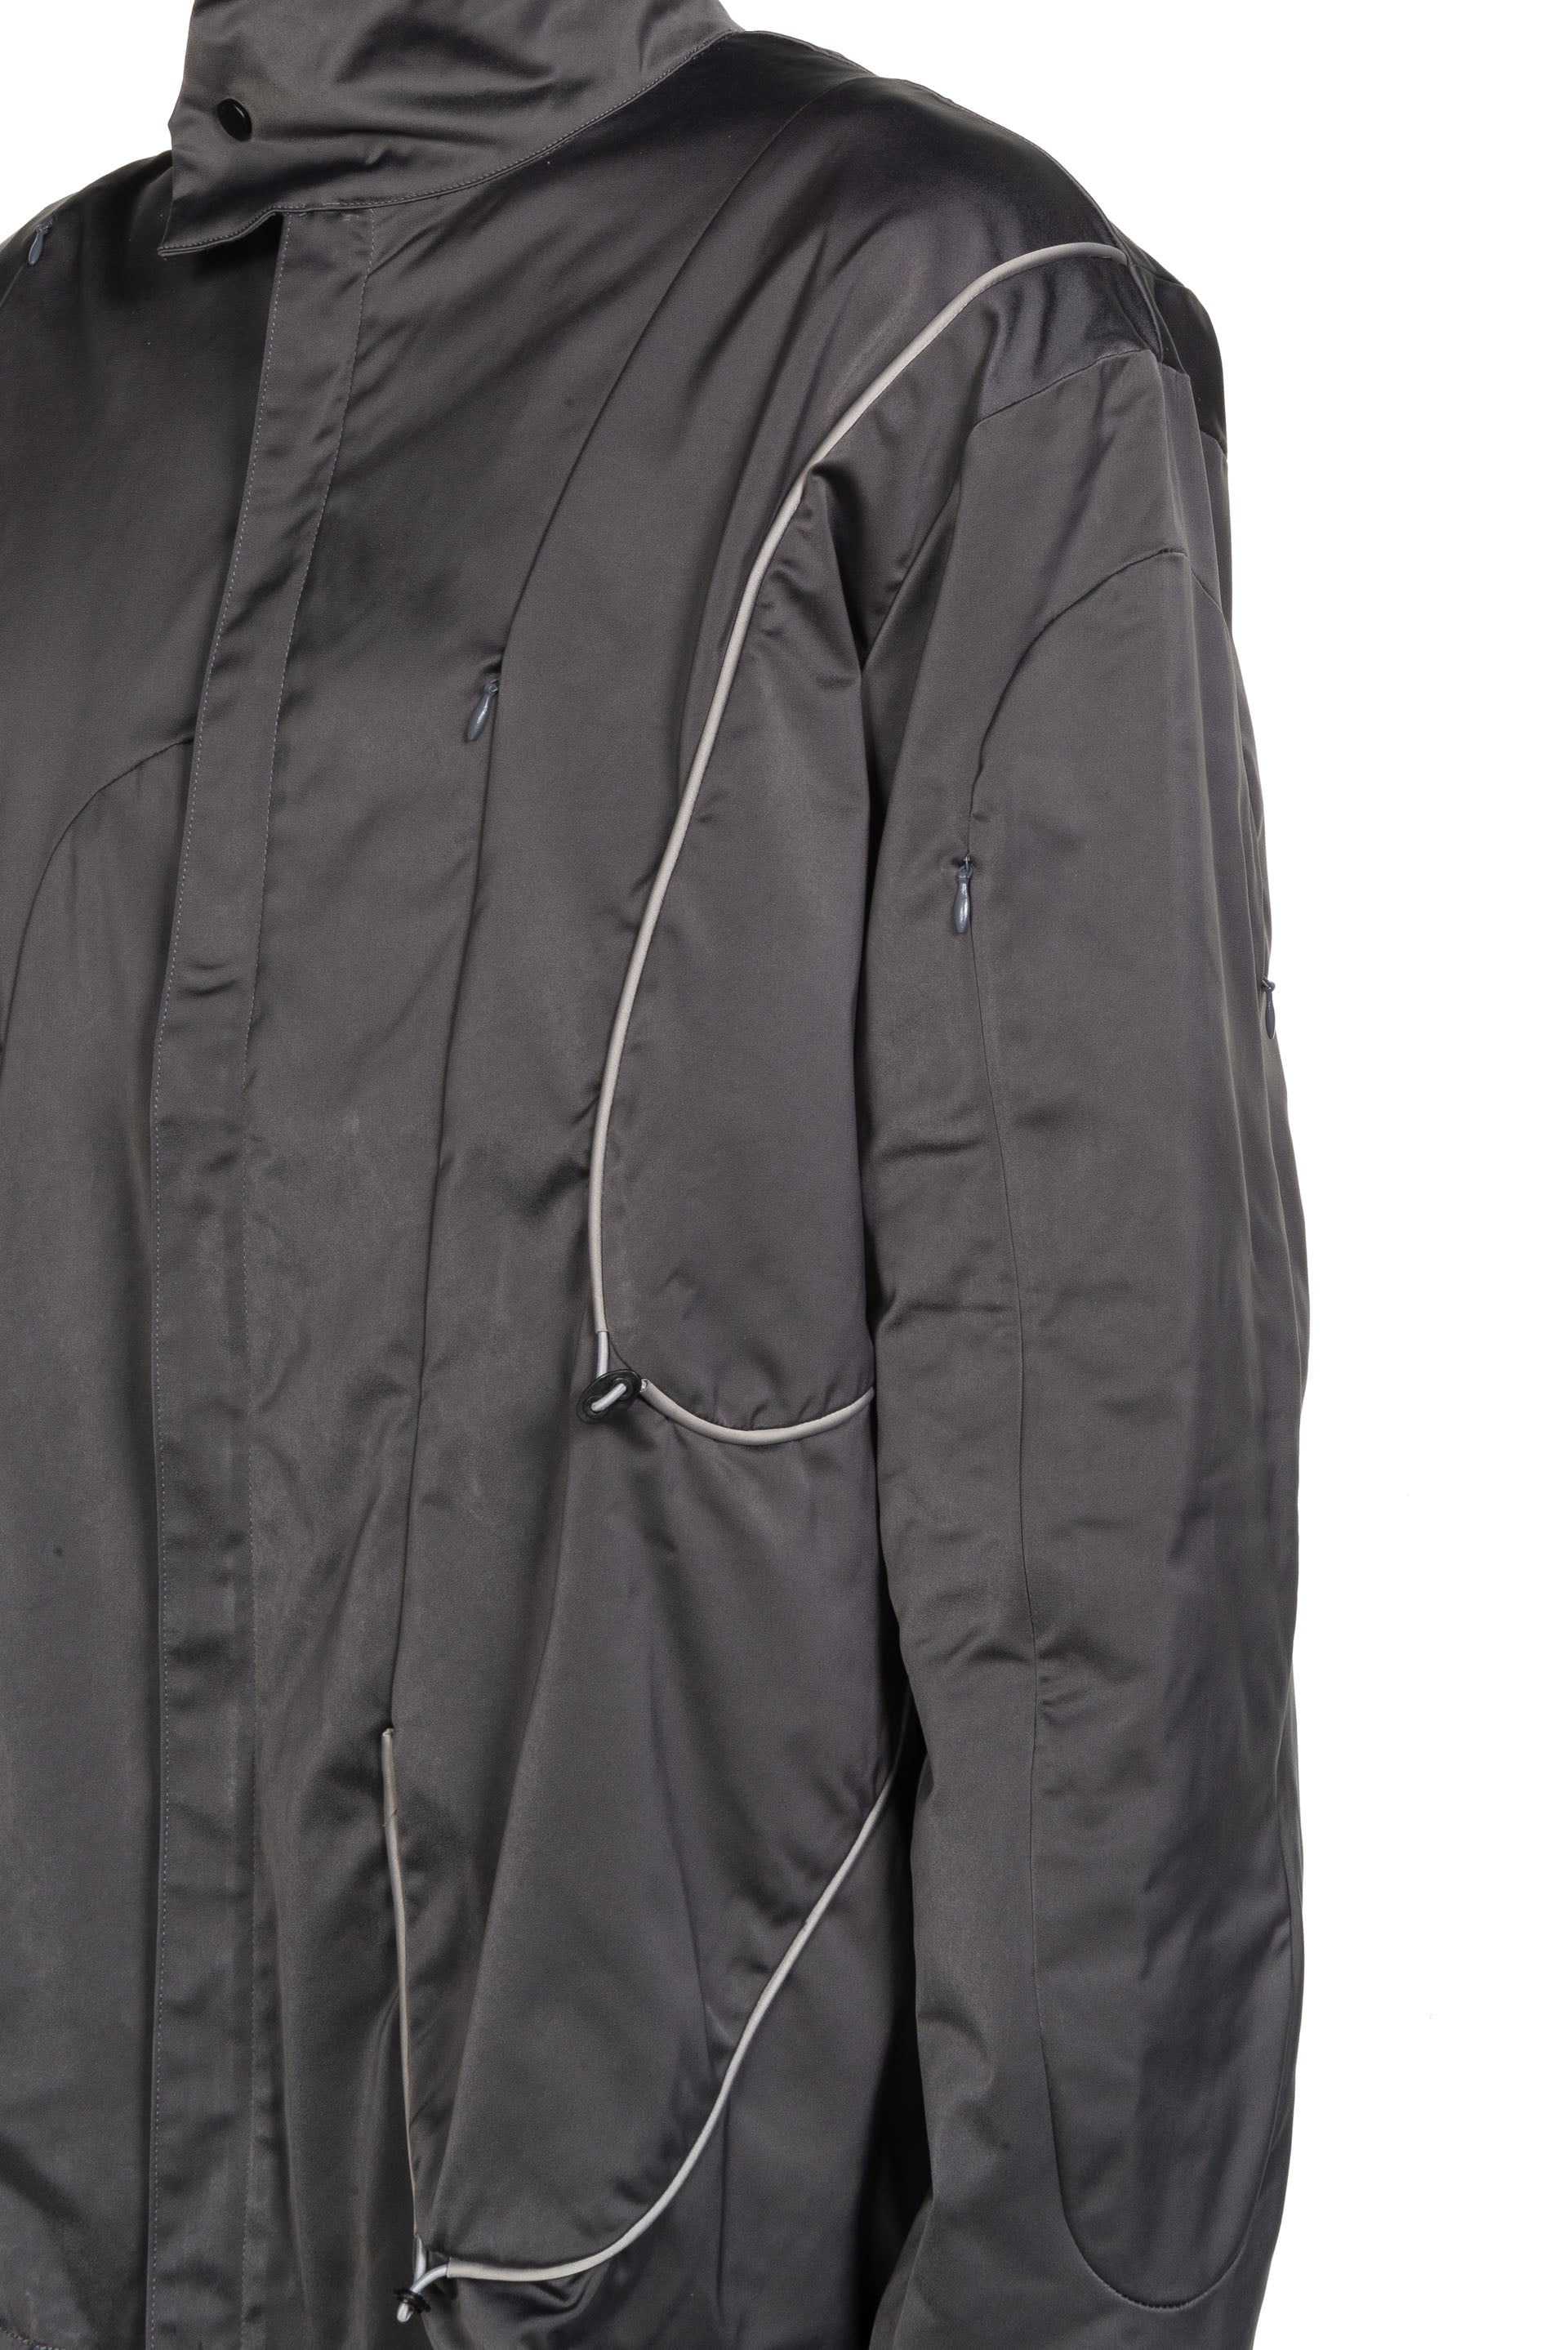 aenrmous/Chasm Mountain Jacket/OUR's - メンズ